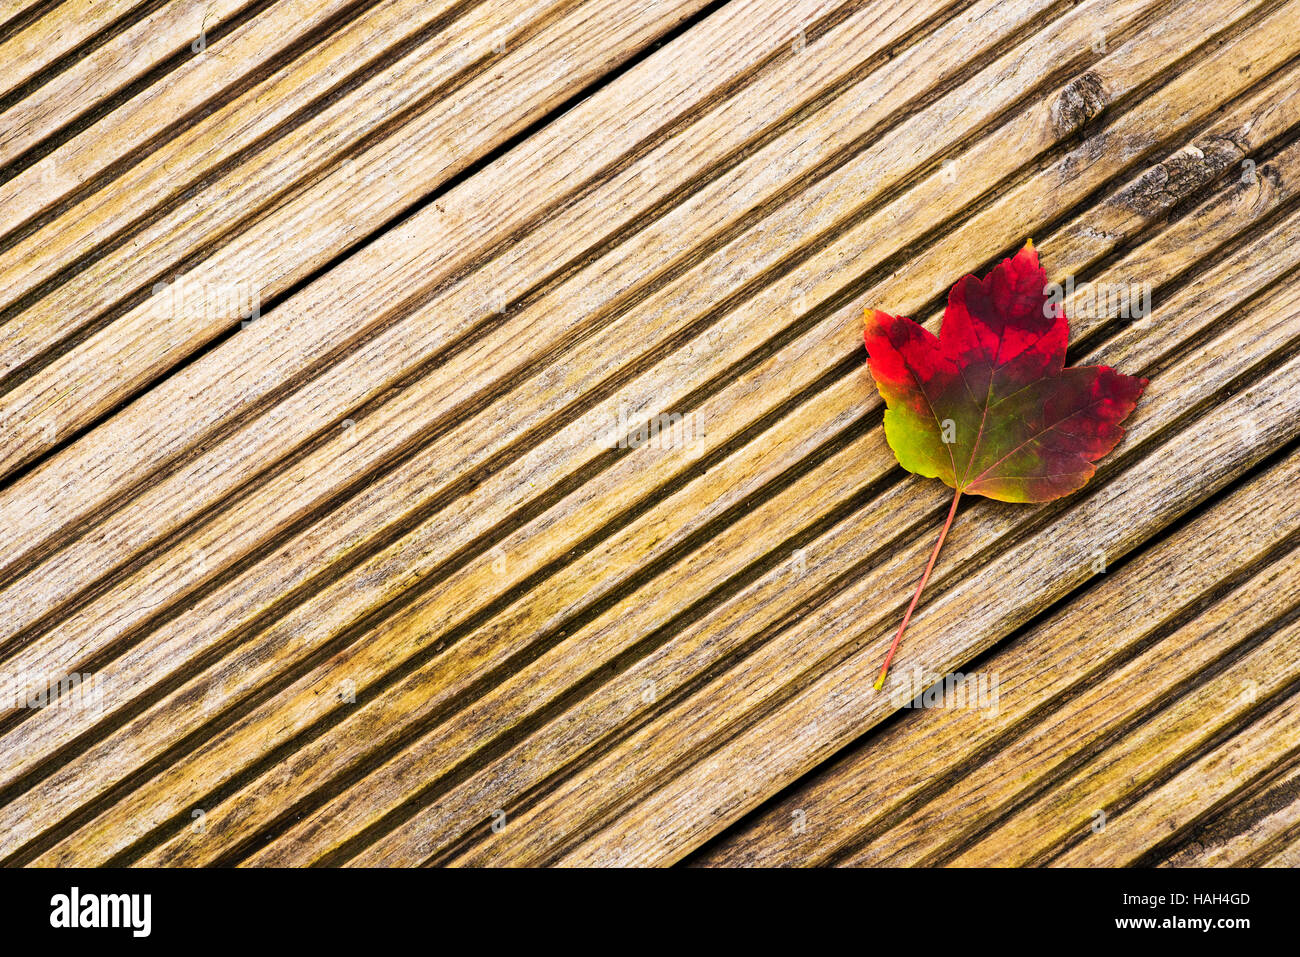 Single leaf of Acer Rubrum October Glory on weathered deck boards. Stock Photo